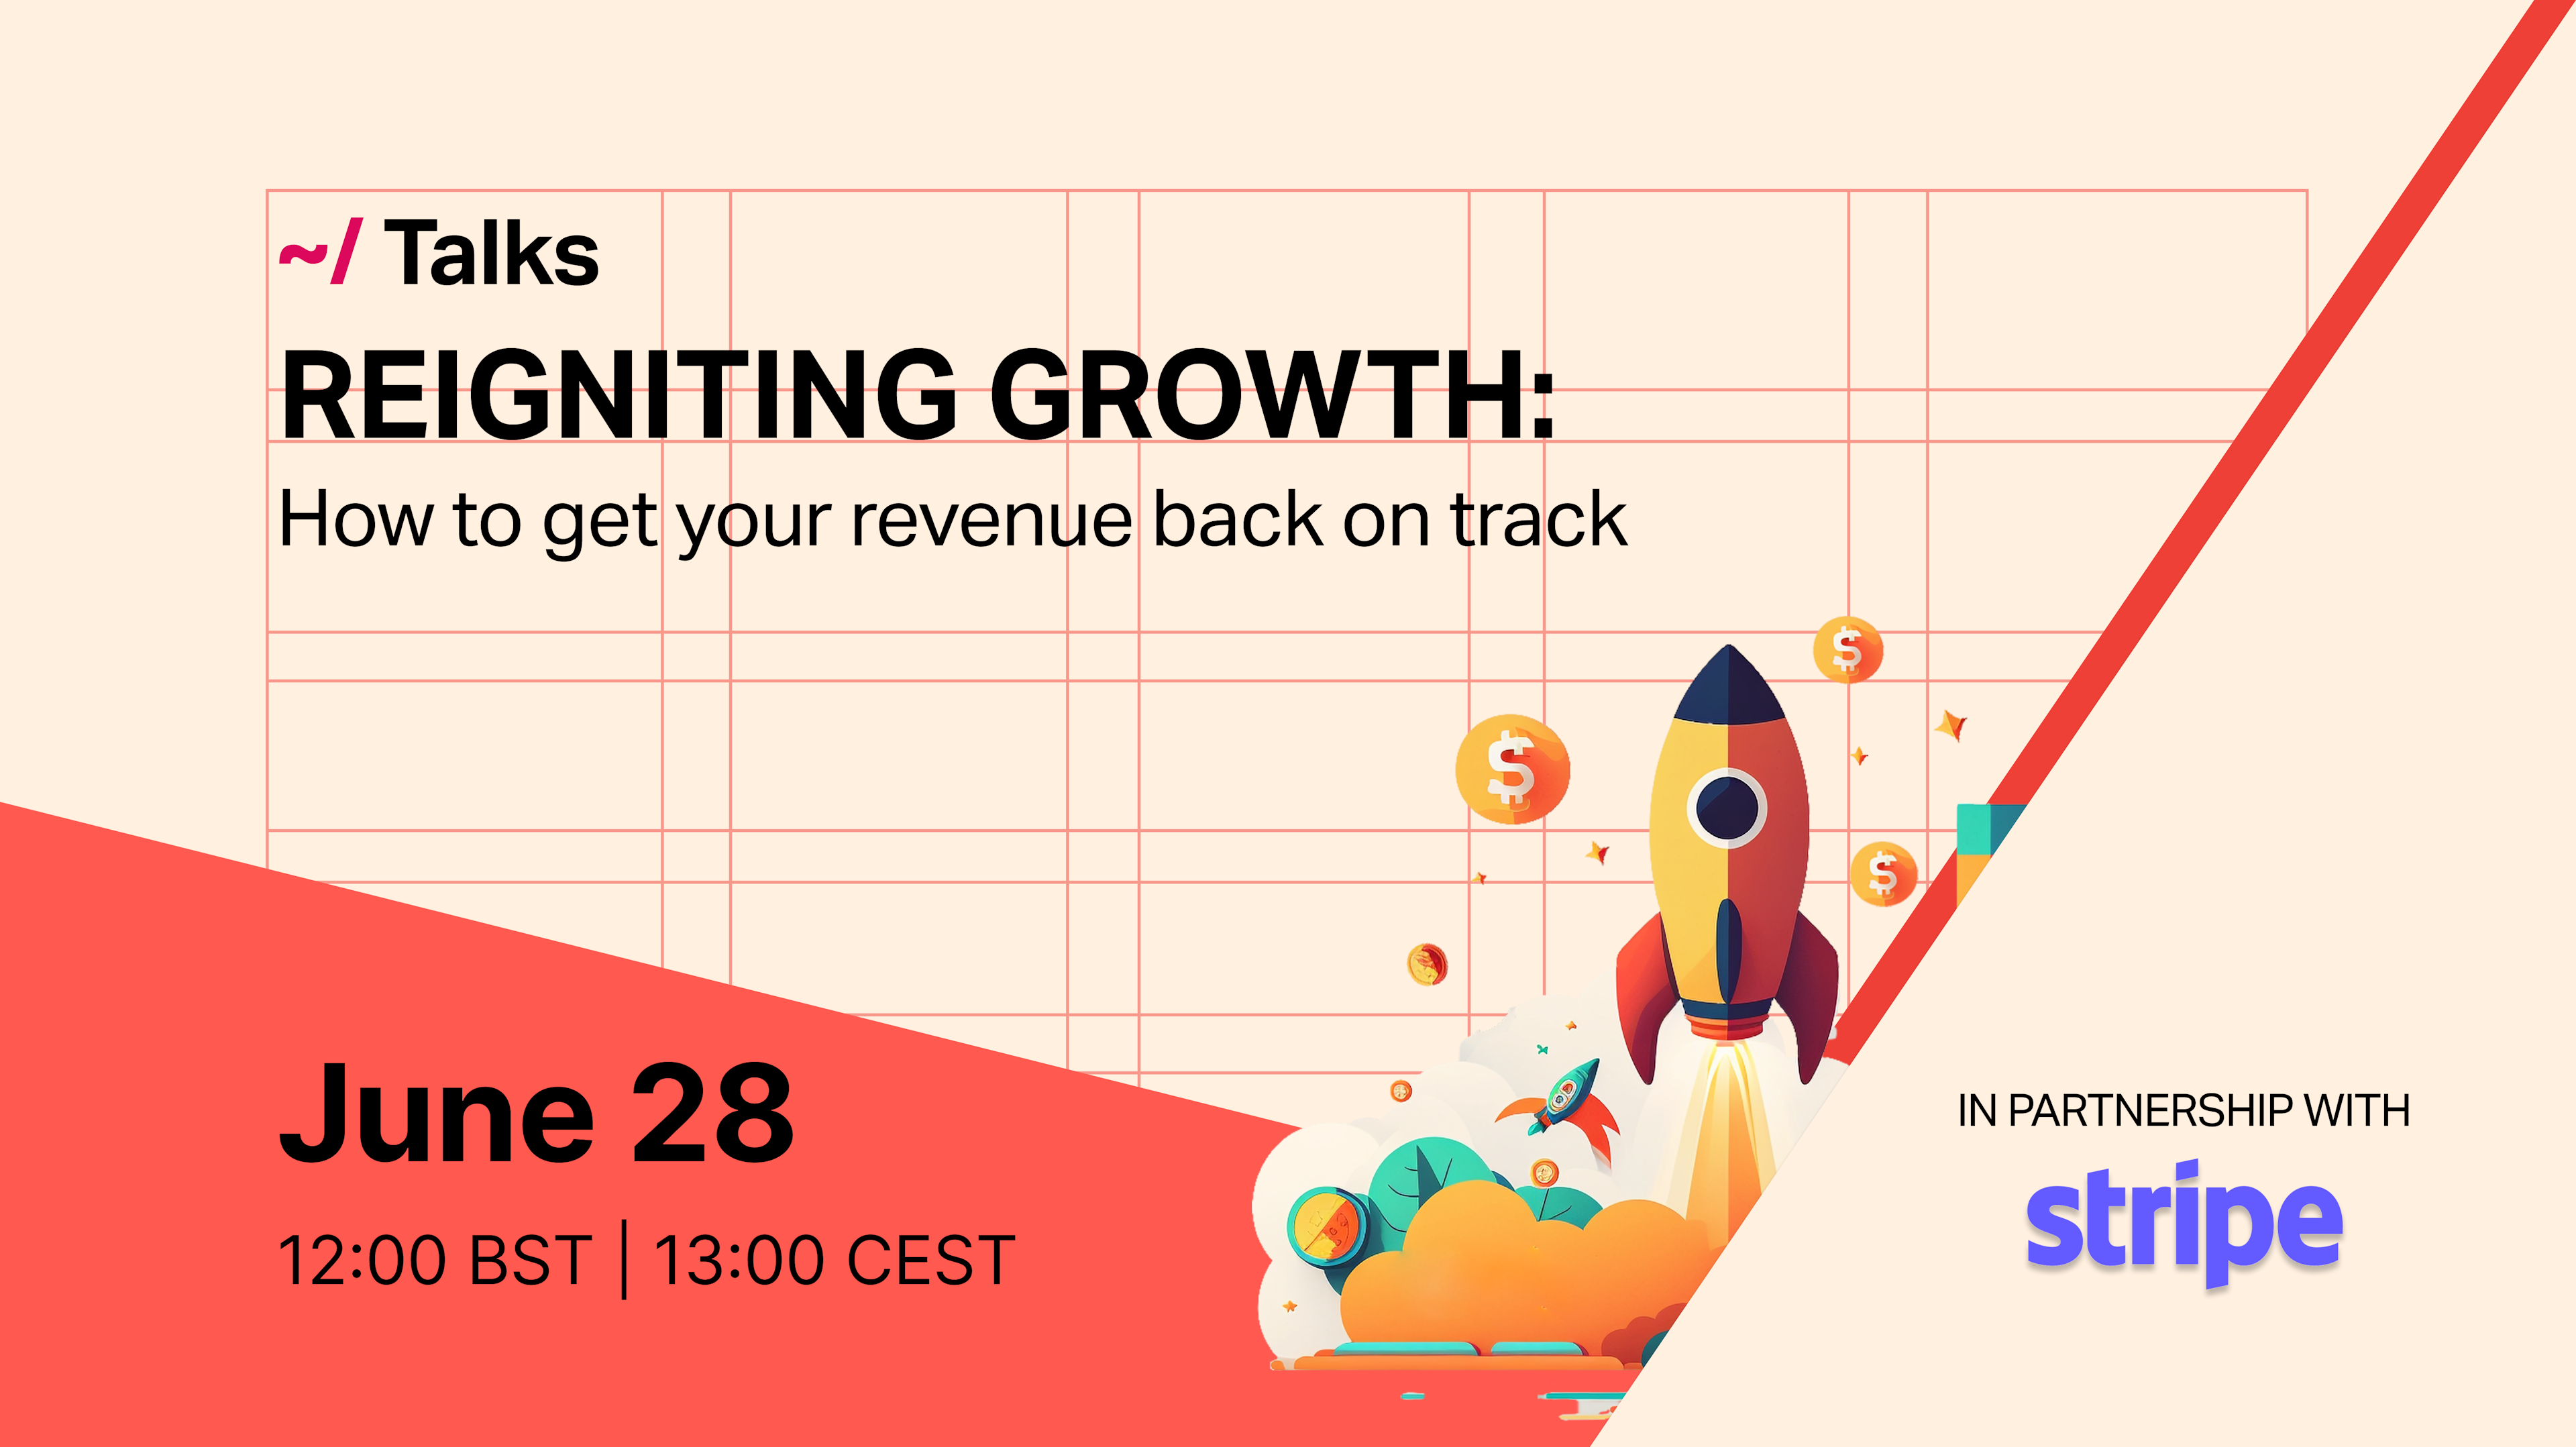 How to get your revenue back on track